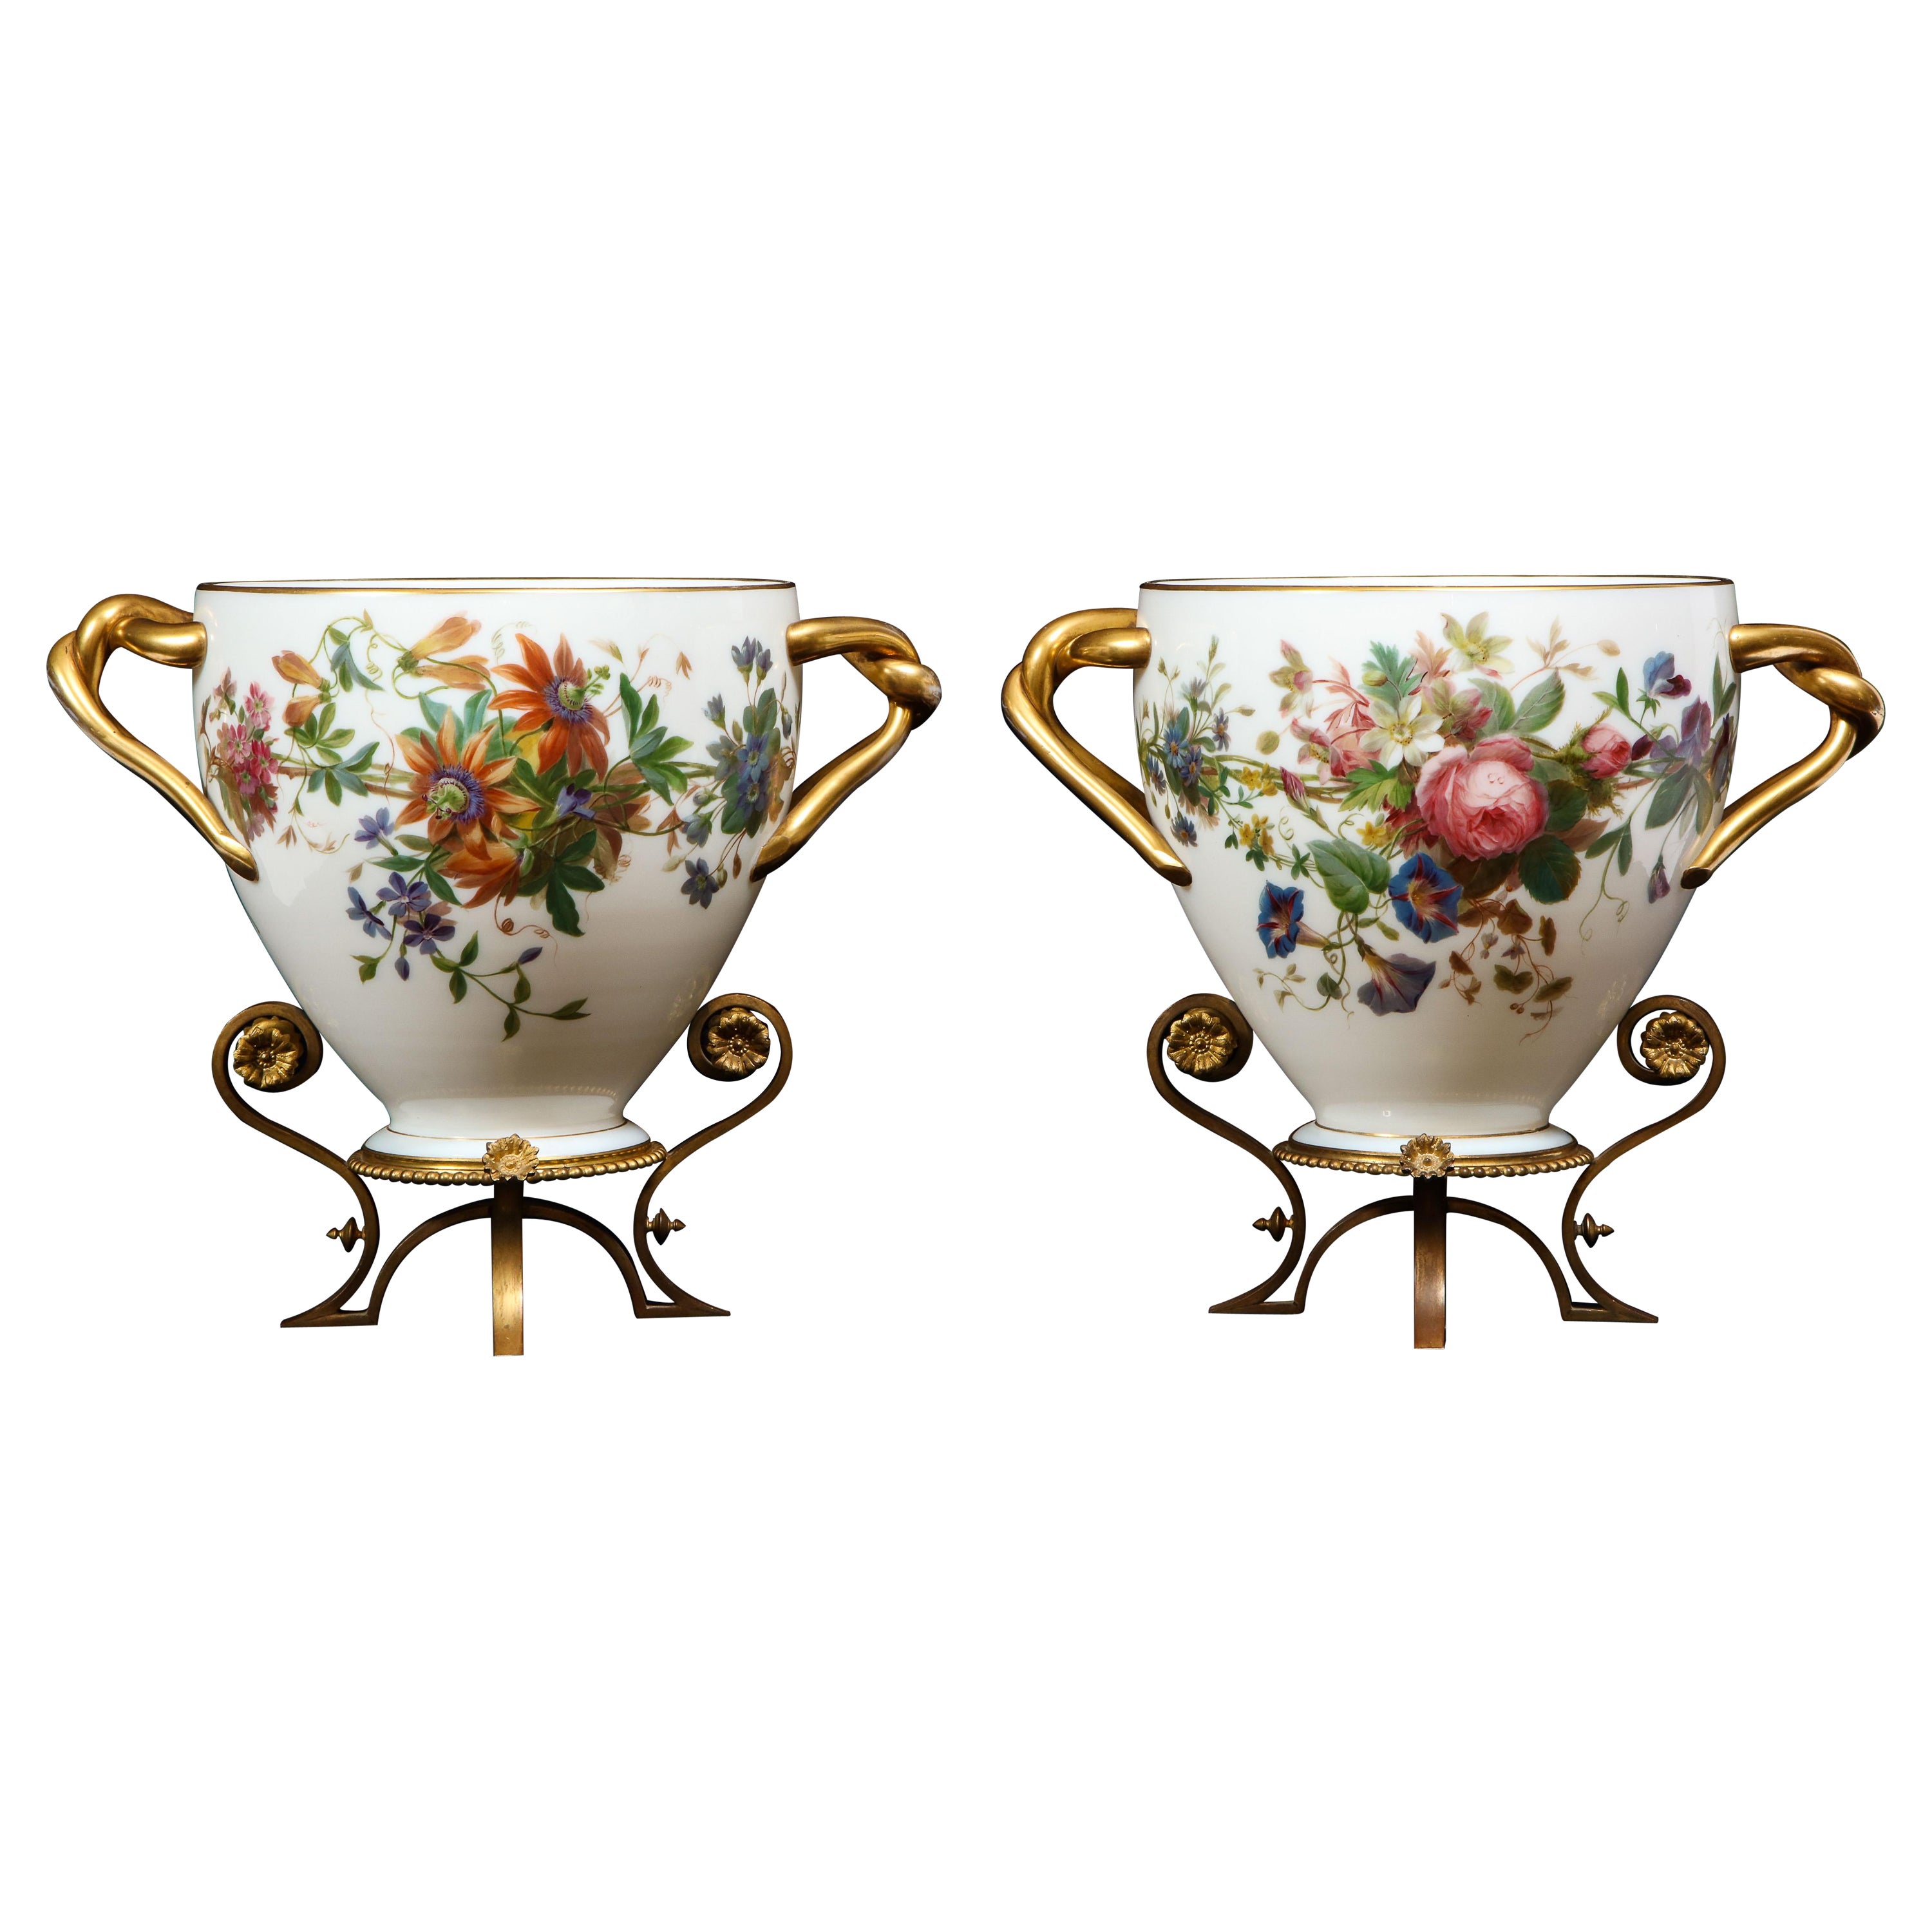 Important Pair of Enamel Hand-Painted White Opaline Vases Signed by Baccarat